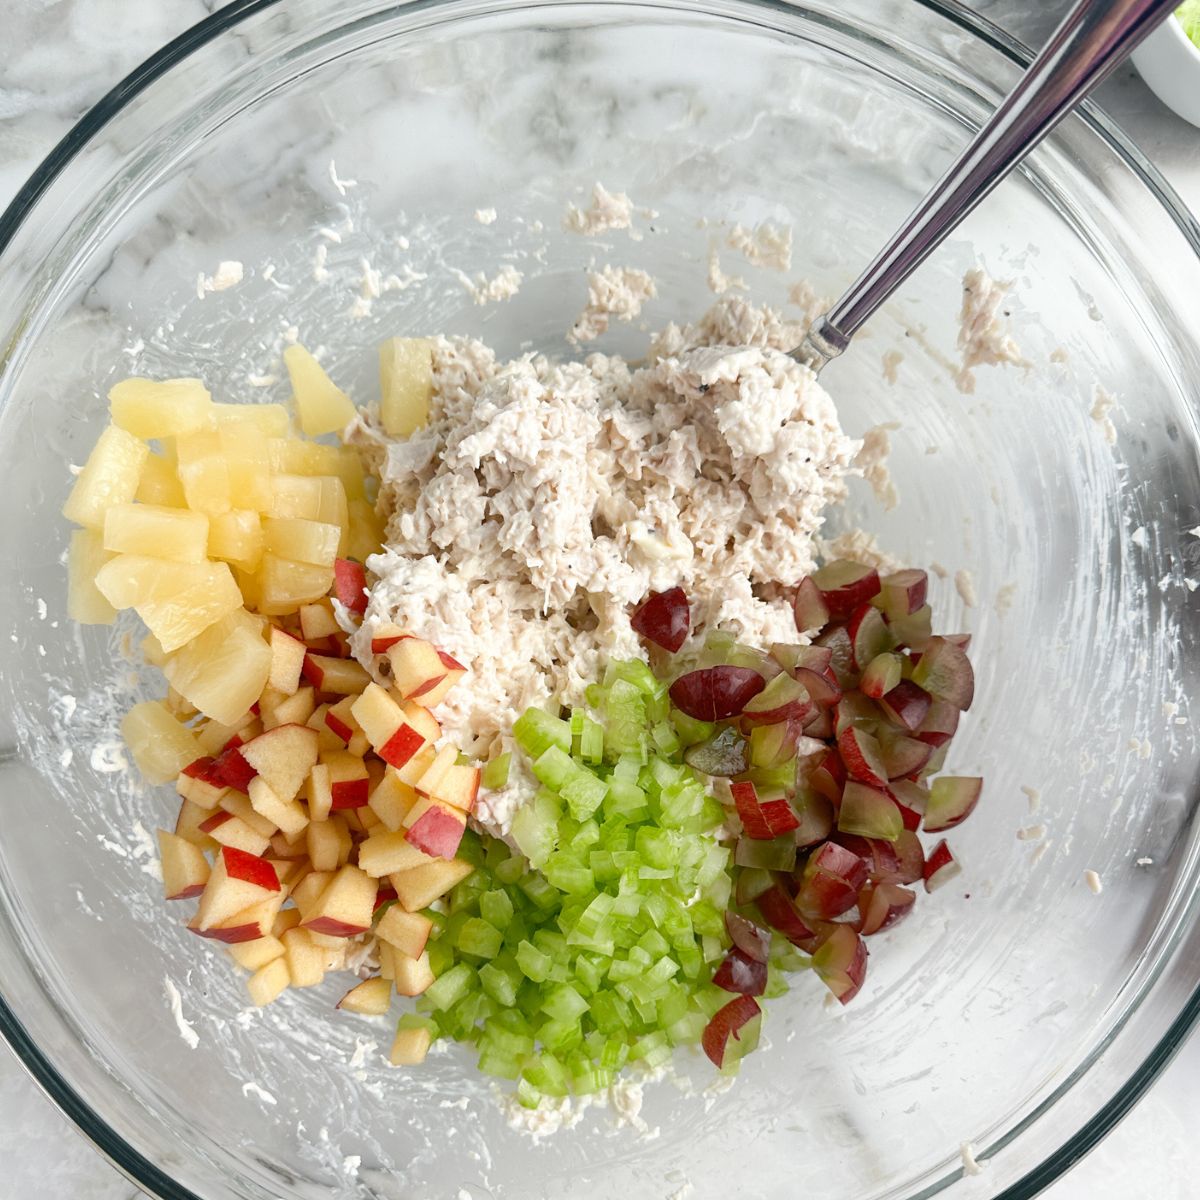 Bowl with diced apples, grapes, celery, pineapple, and chicken.